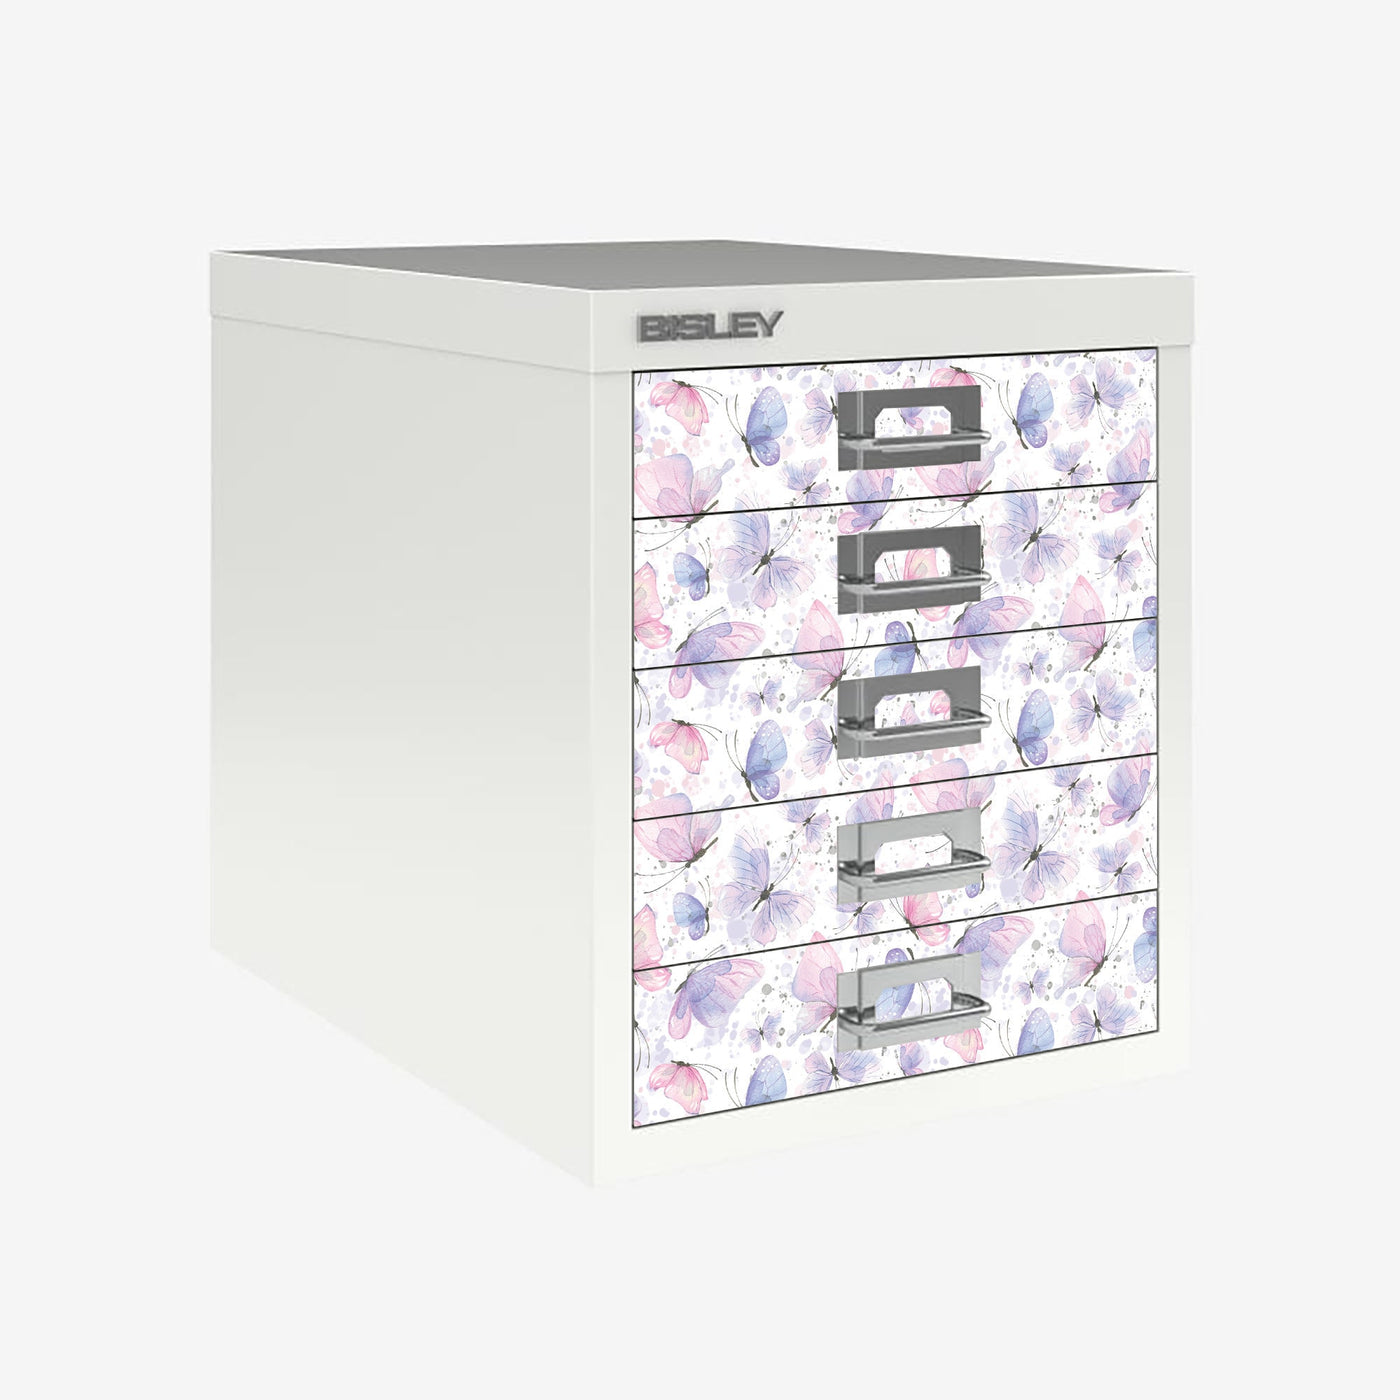 Butterfly decals for Bisley 5 drawer cabinet (not included)